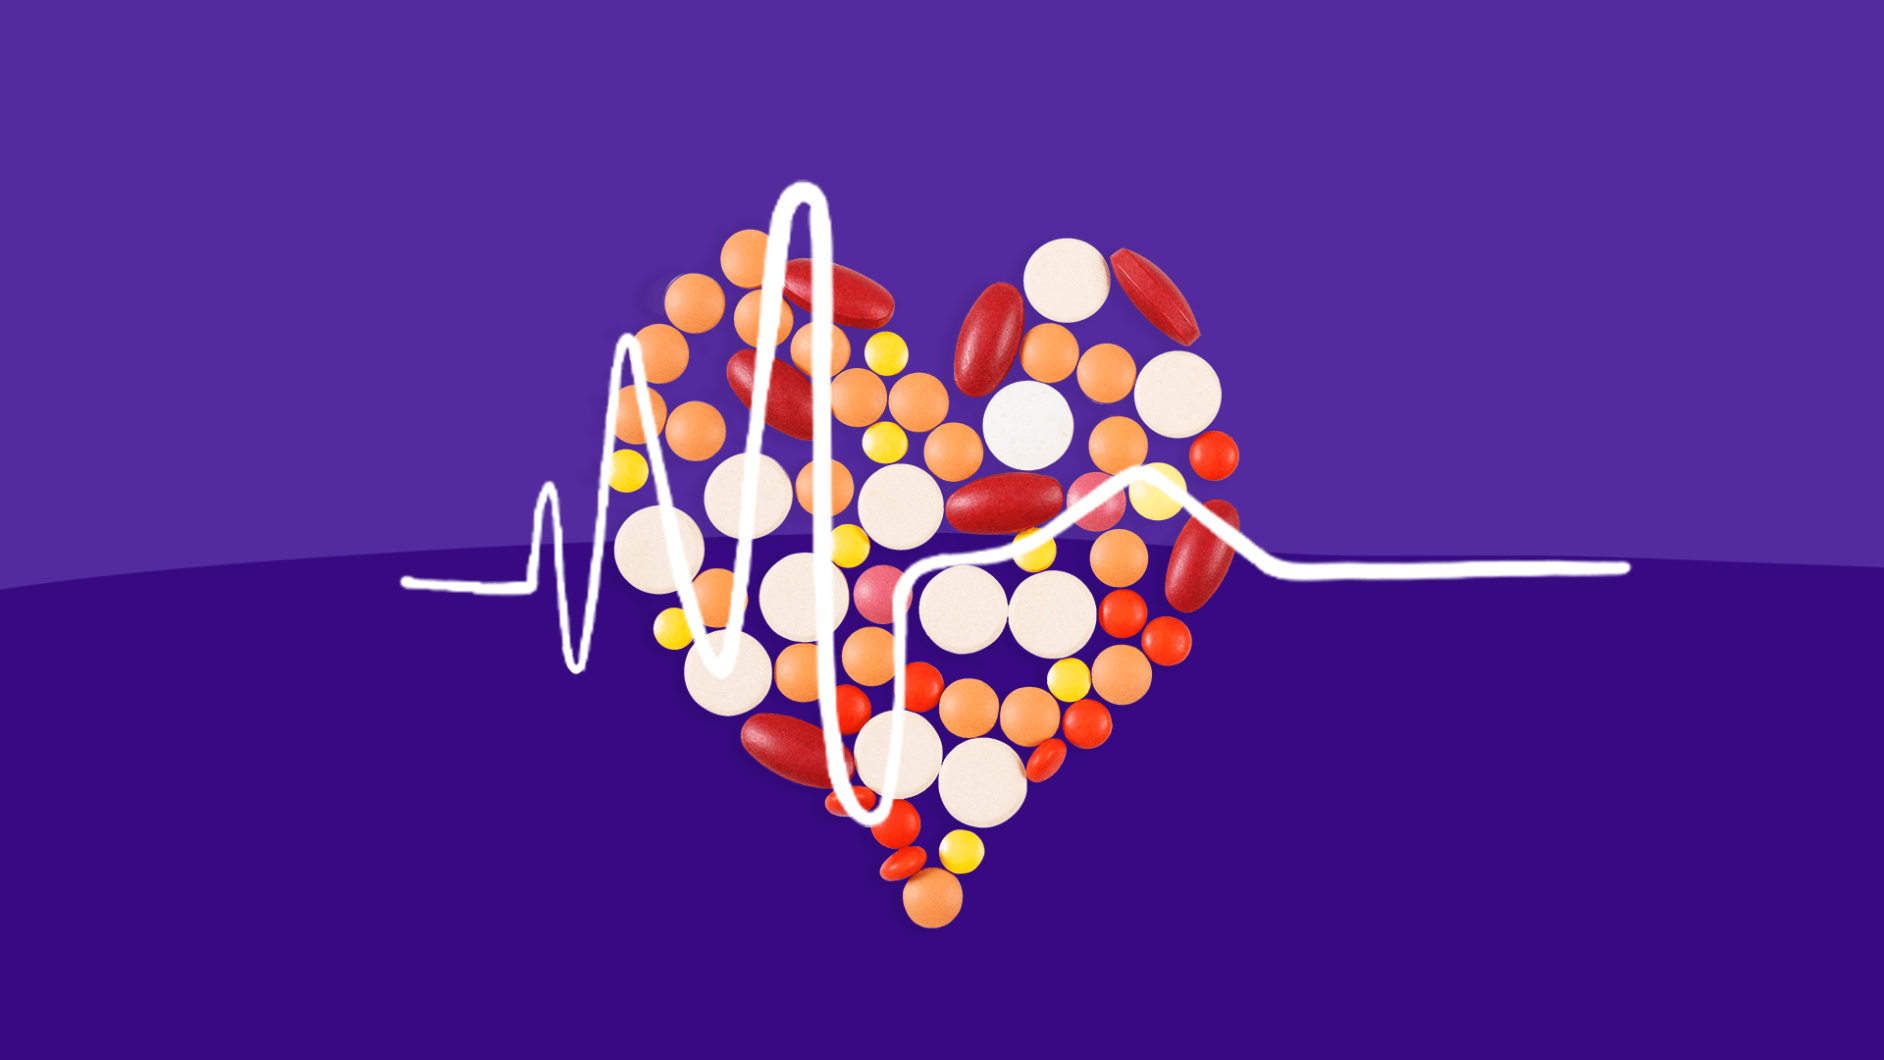 Pills with a heart line represent drugs that increase heart rate